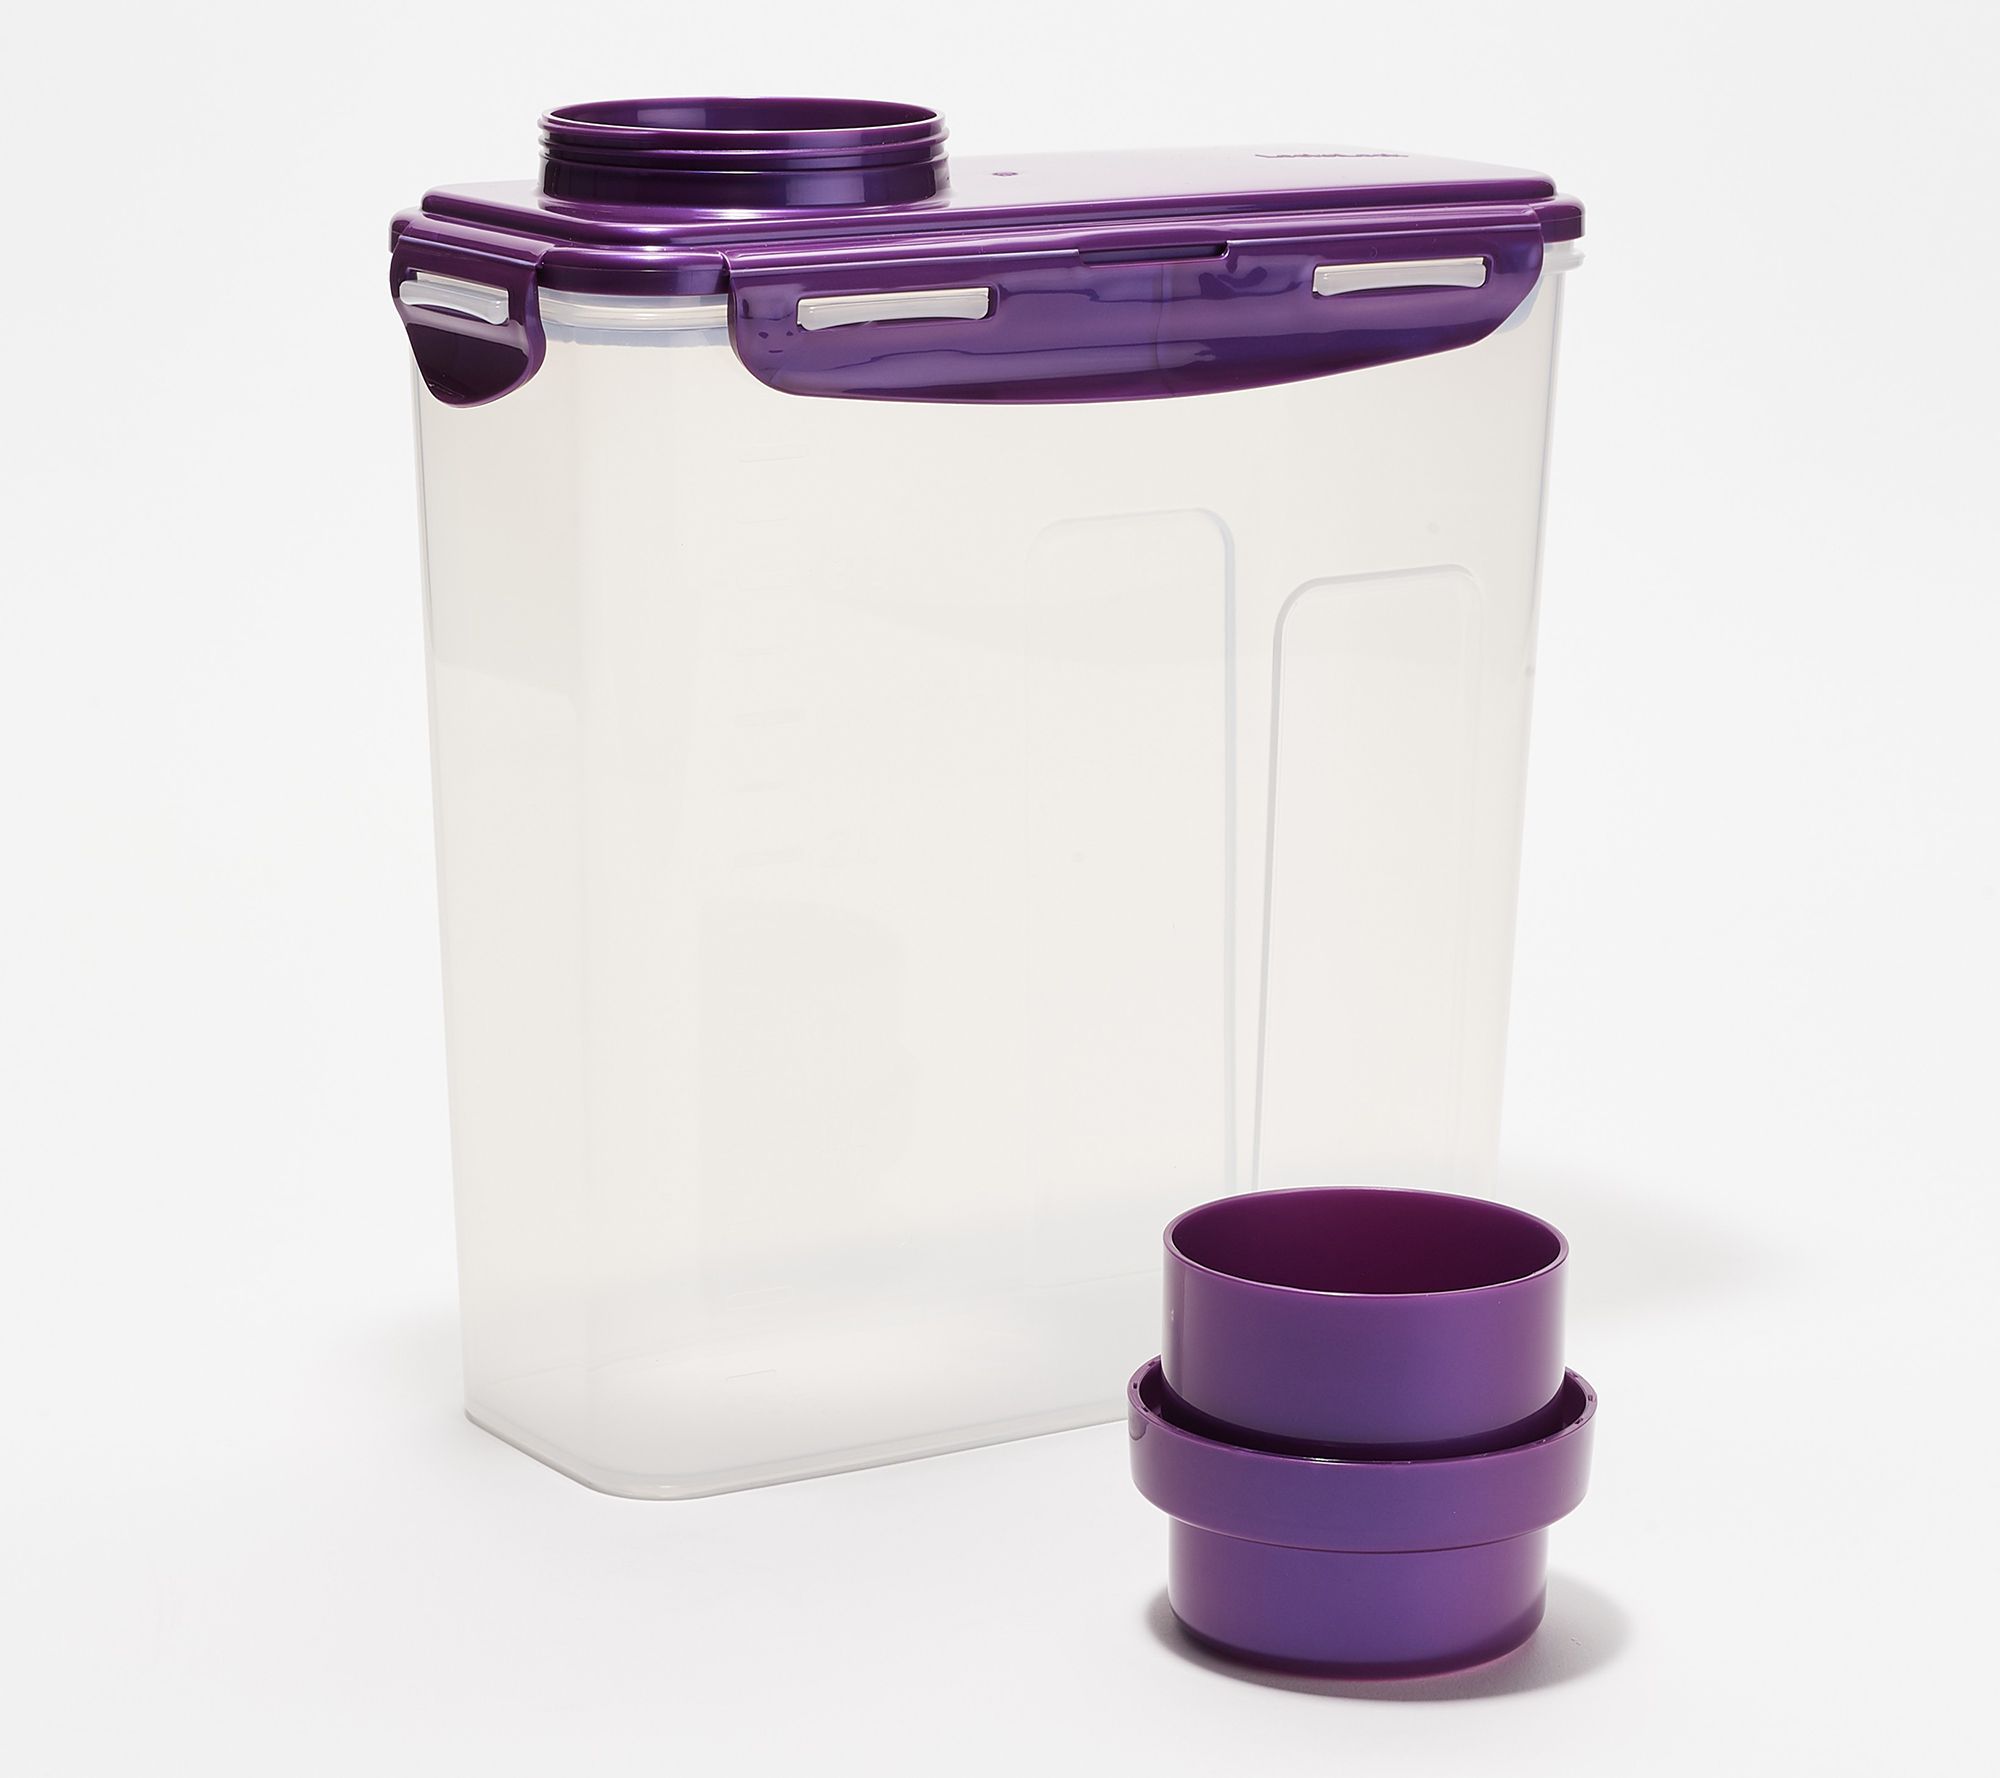 LocknLock Set of 2 Pantry Storage Containers w/ Pour Spout